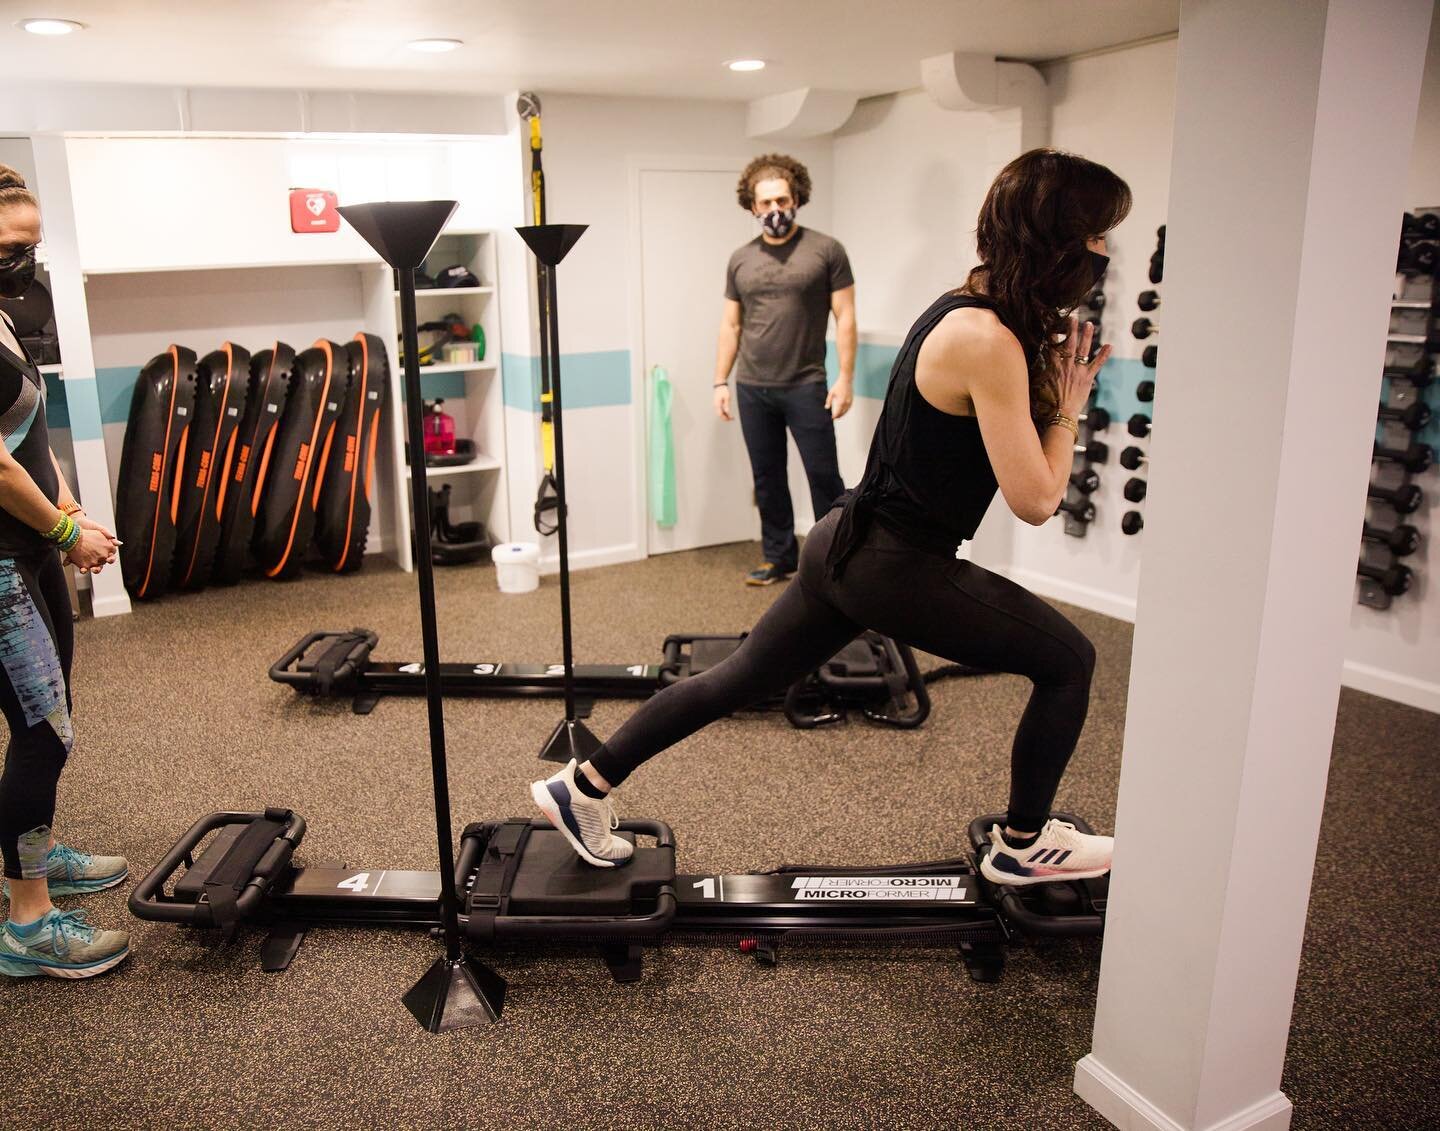 Wondering what working out on a reformer with me is really like. Is it pilates?  What is it?  This articles helps describe the workout 
Come try @bodyrockfitness_nj  https://www.glam.com/wellness/megaformer-total-body-workout/